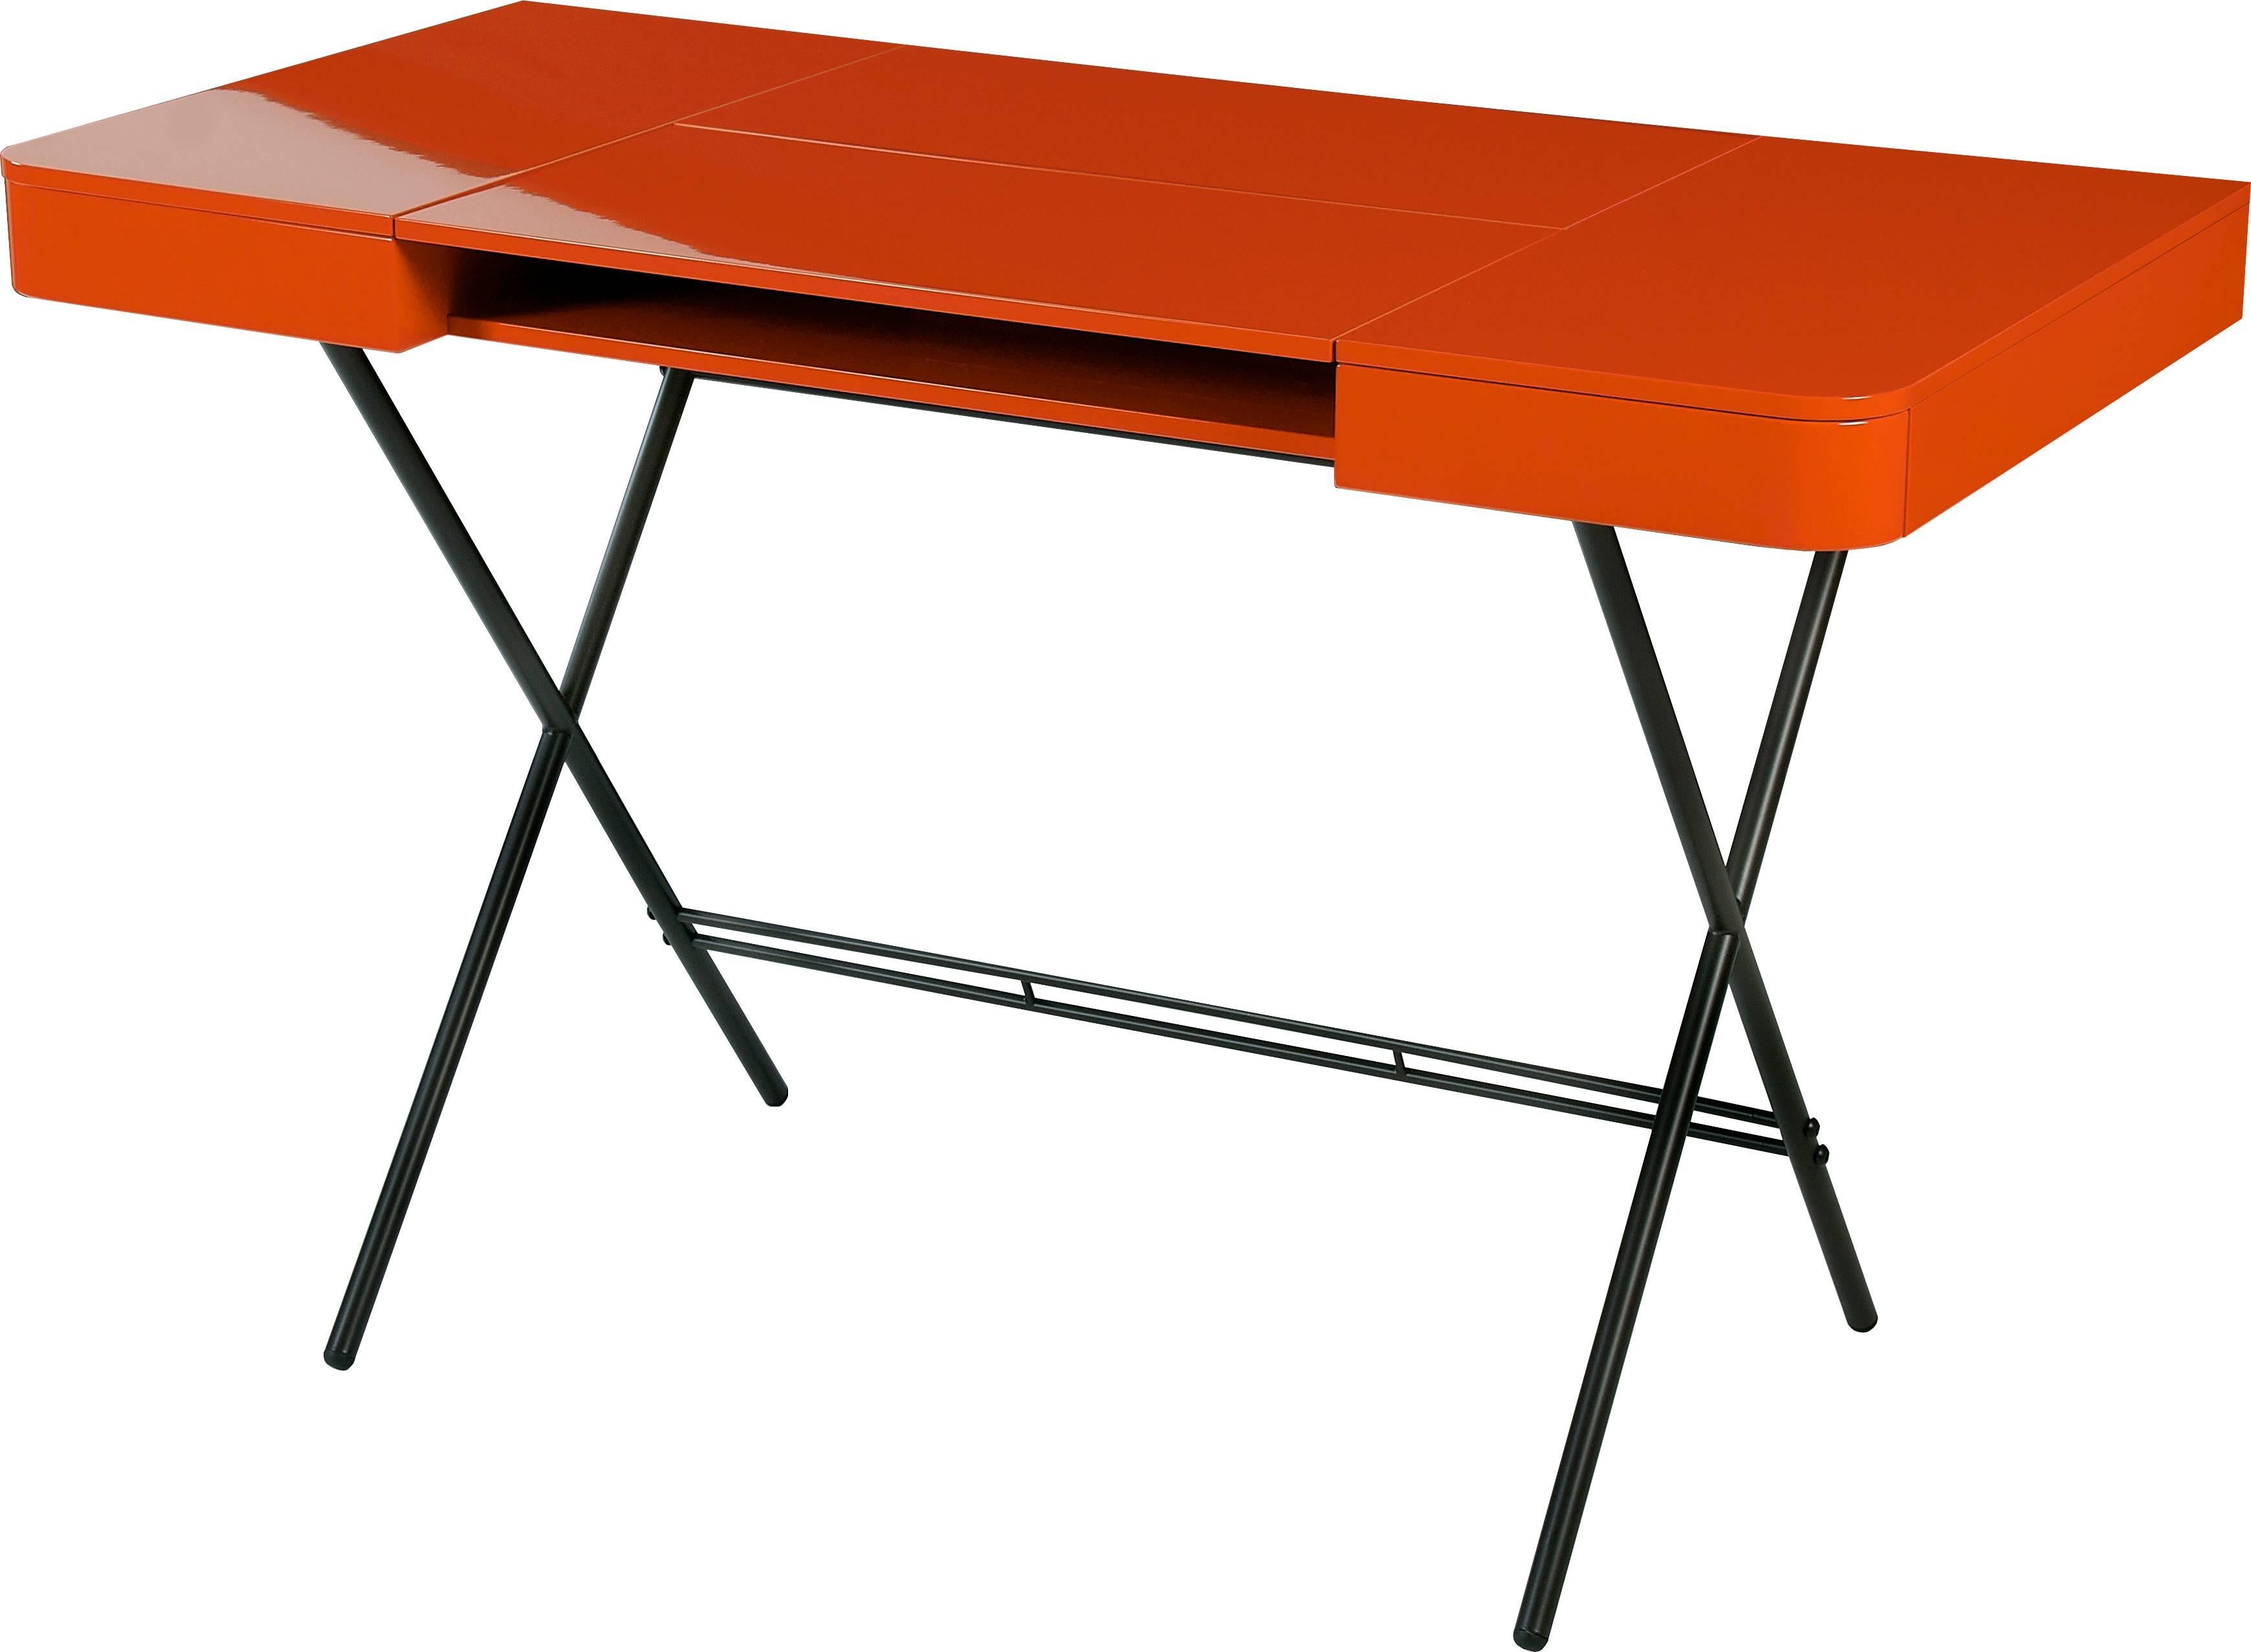 Contemporary Cosimo Desk by Marco Zanuso Jr. with Orange Glossy Lacquered Top im Angebot 1